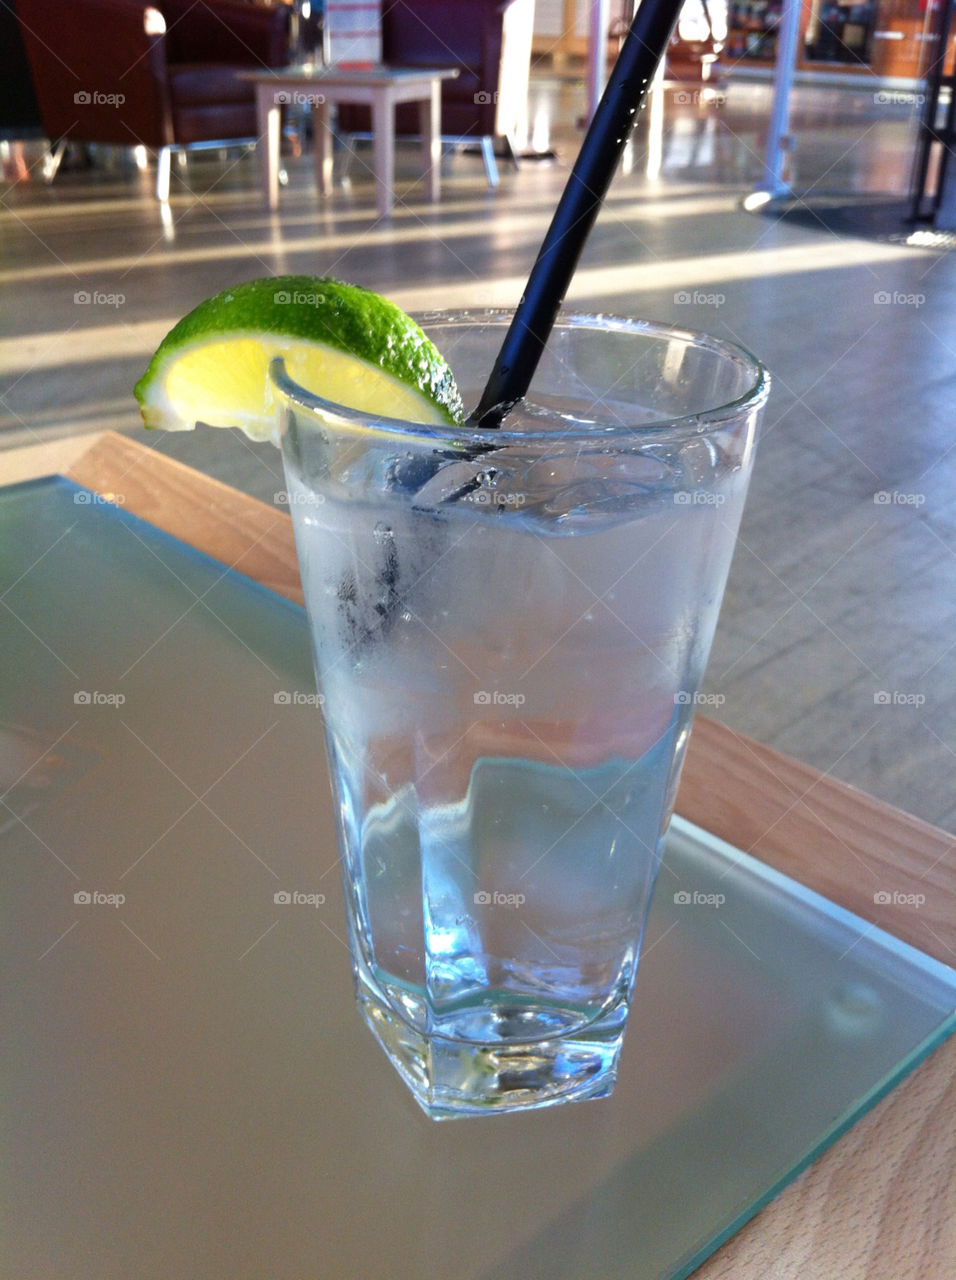 airport lounge gin and tonic victoria bc canada by vernb67